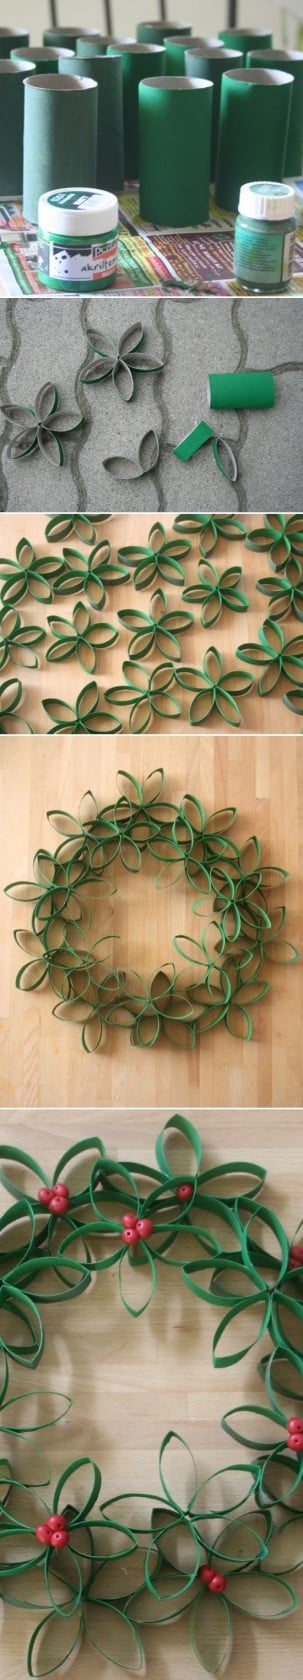 Toilet Paper Roll Christmas Wreath...these are the BEST Homemade Wreath Ideas!